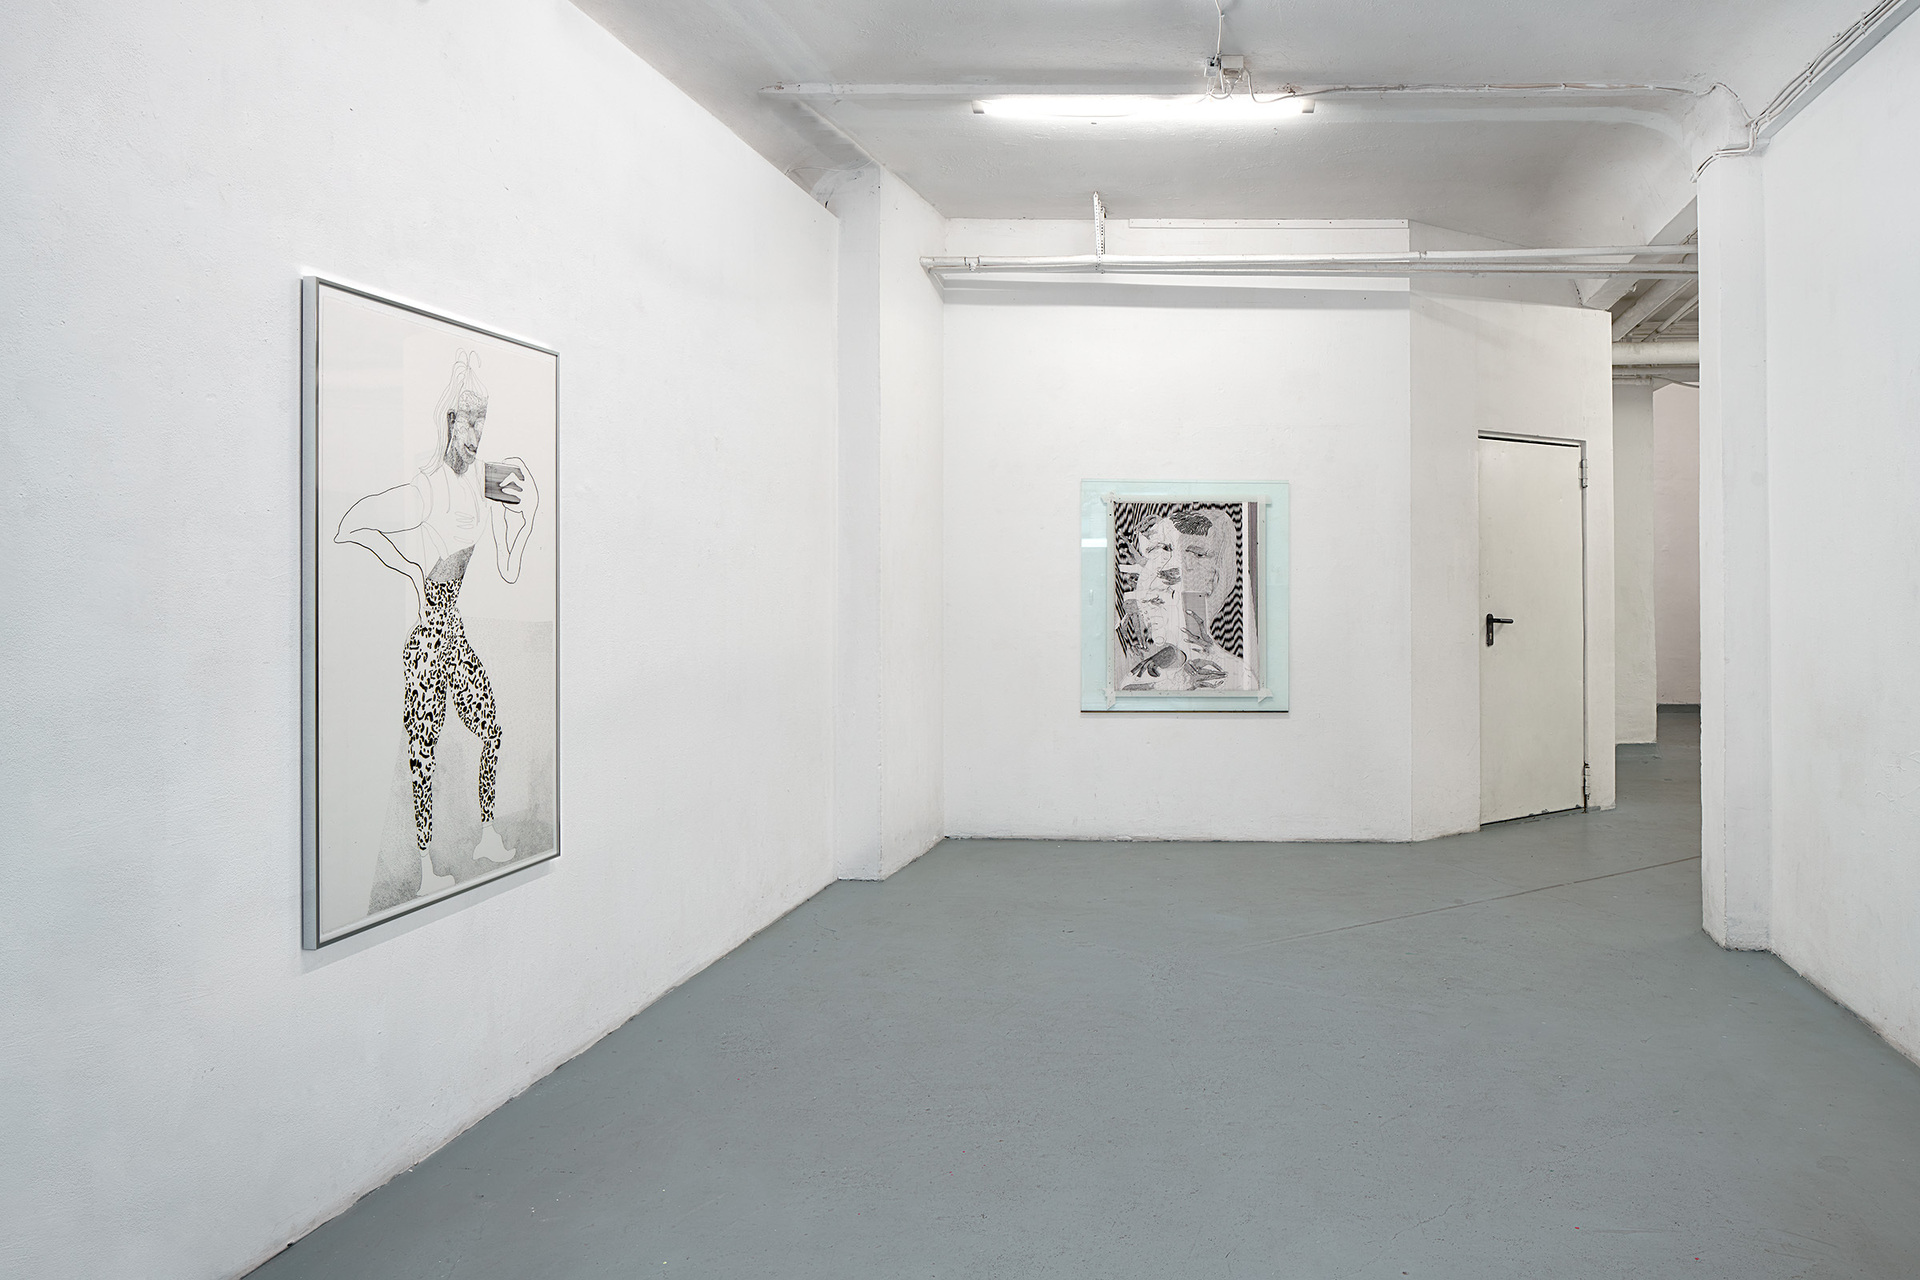 Katharina Schücke, UMSTYLING, 2022, basis project space, entrance installation view